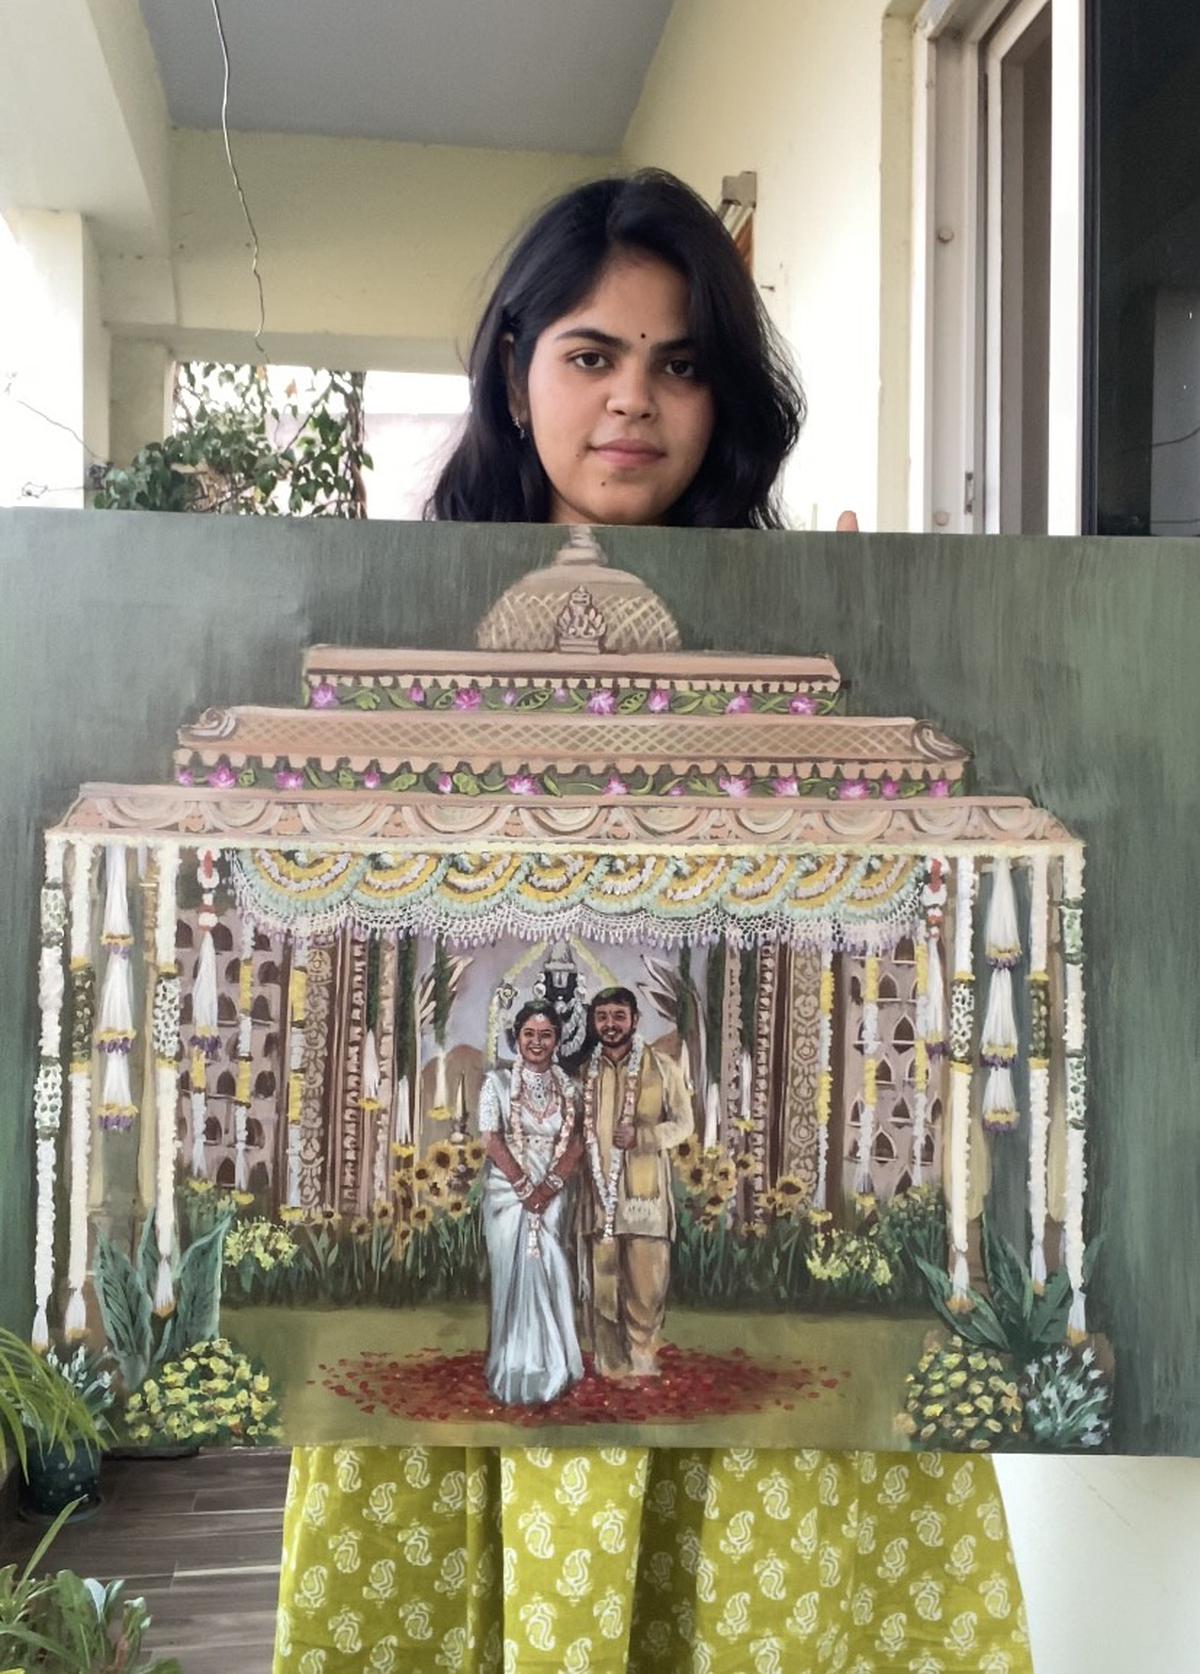 Dhanushya Pallem shows a painting done by her